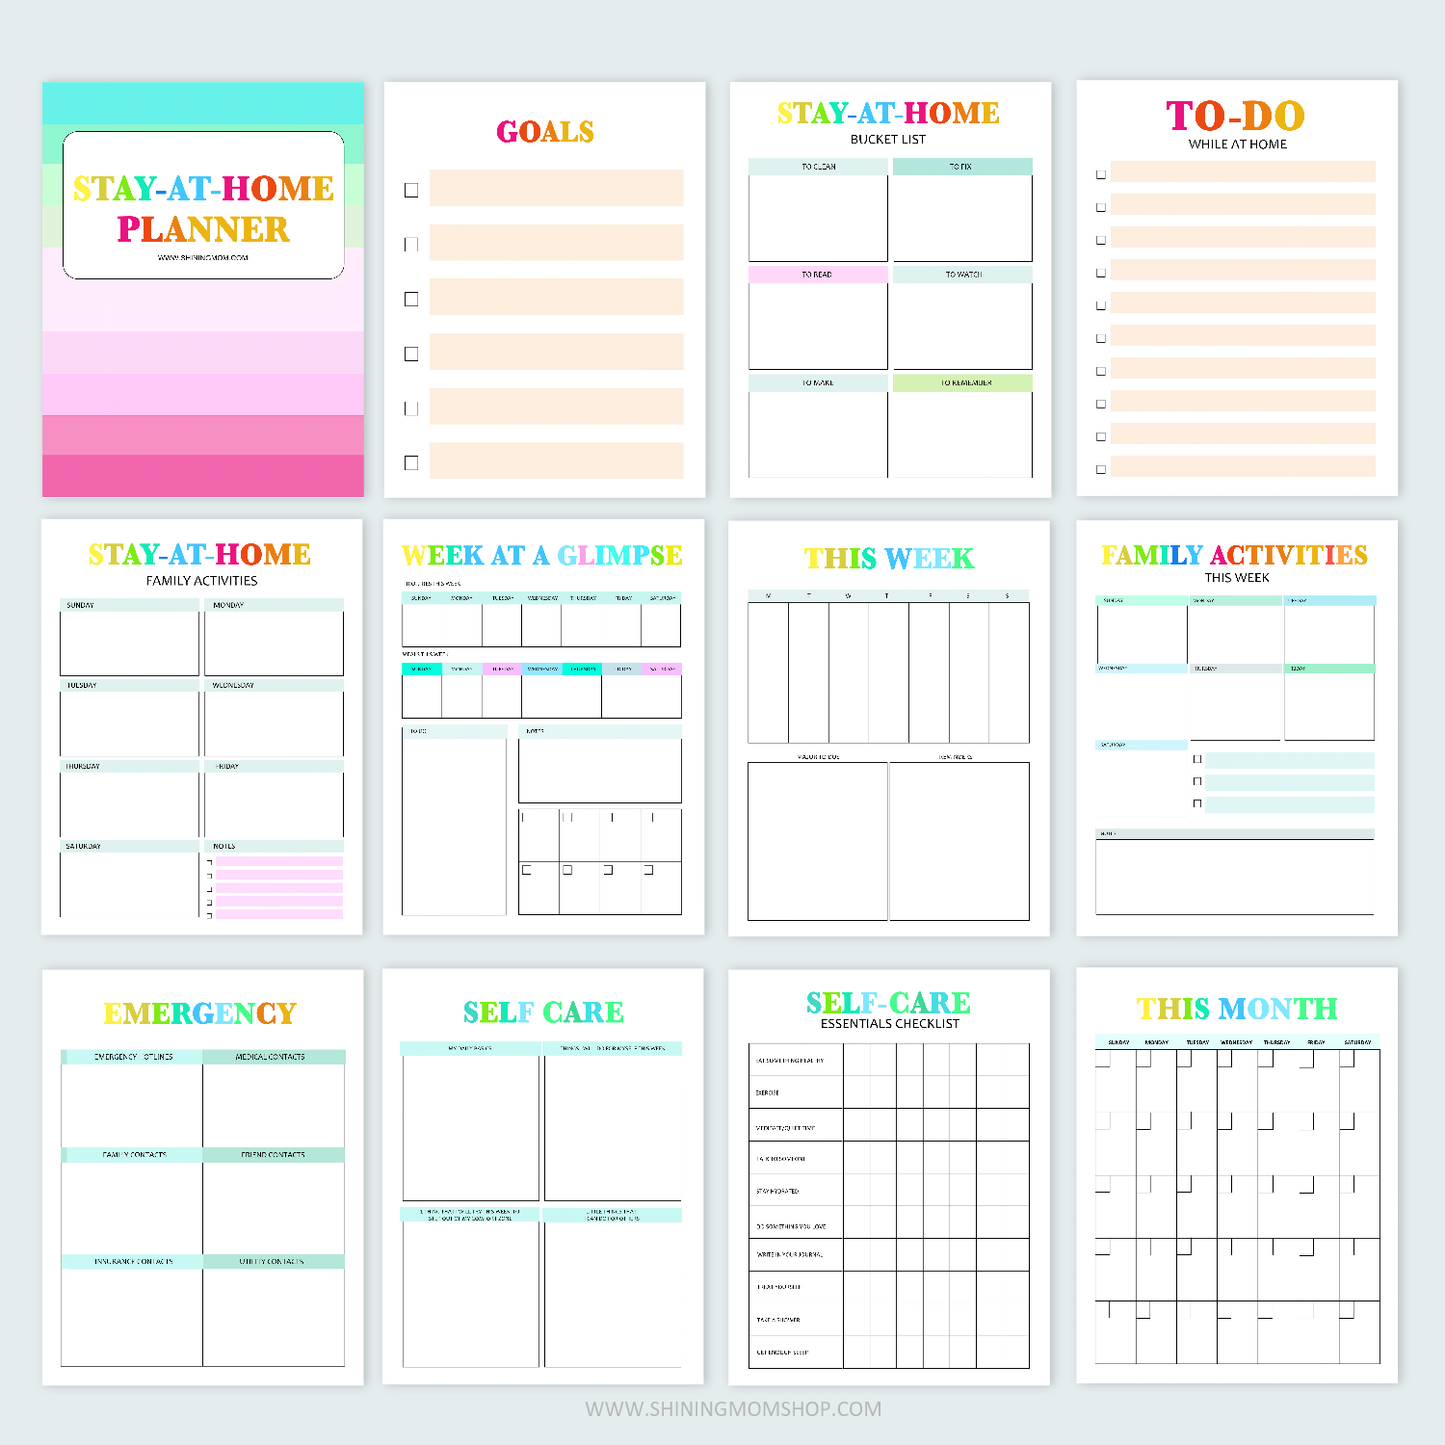 Stay-at-Home Planner (Premium Edition)